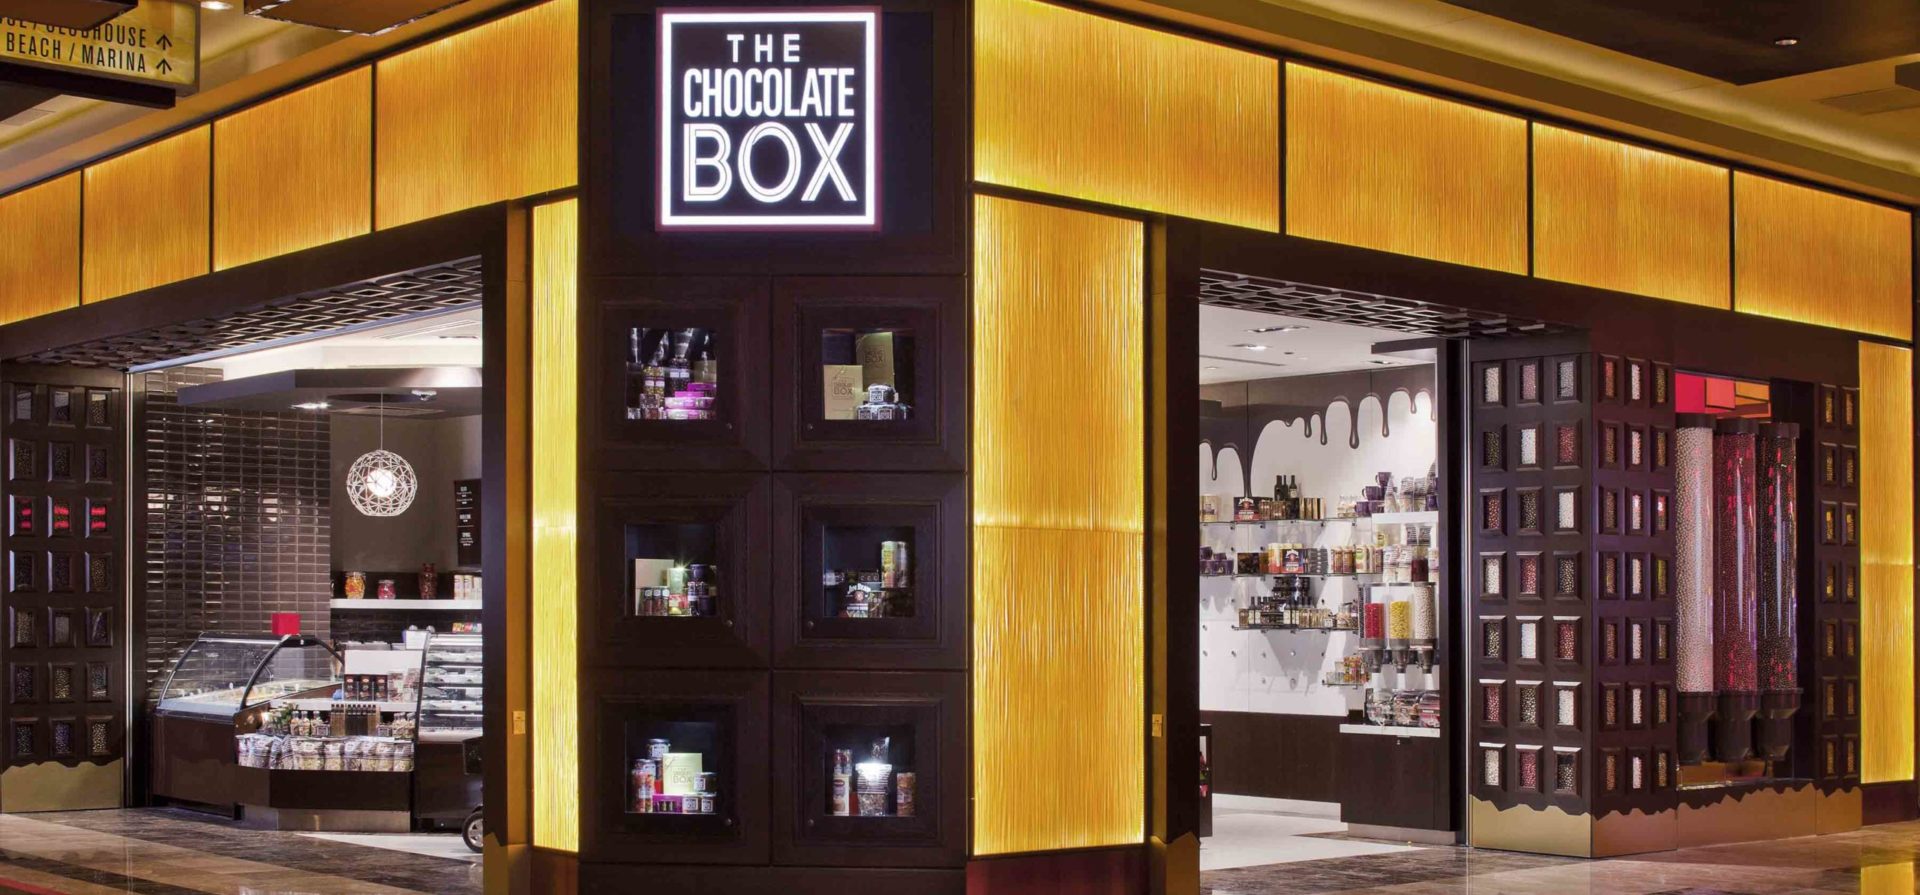 Golden Nugget Retail Stores: Chocolate Box